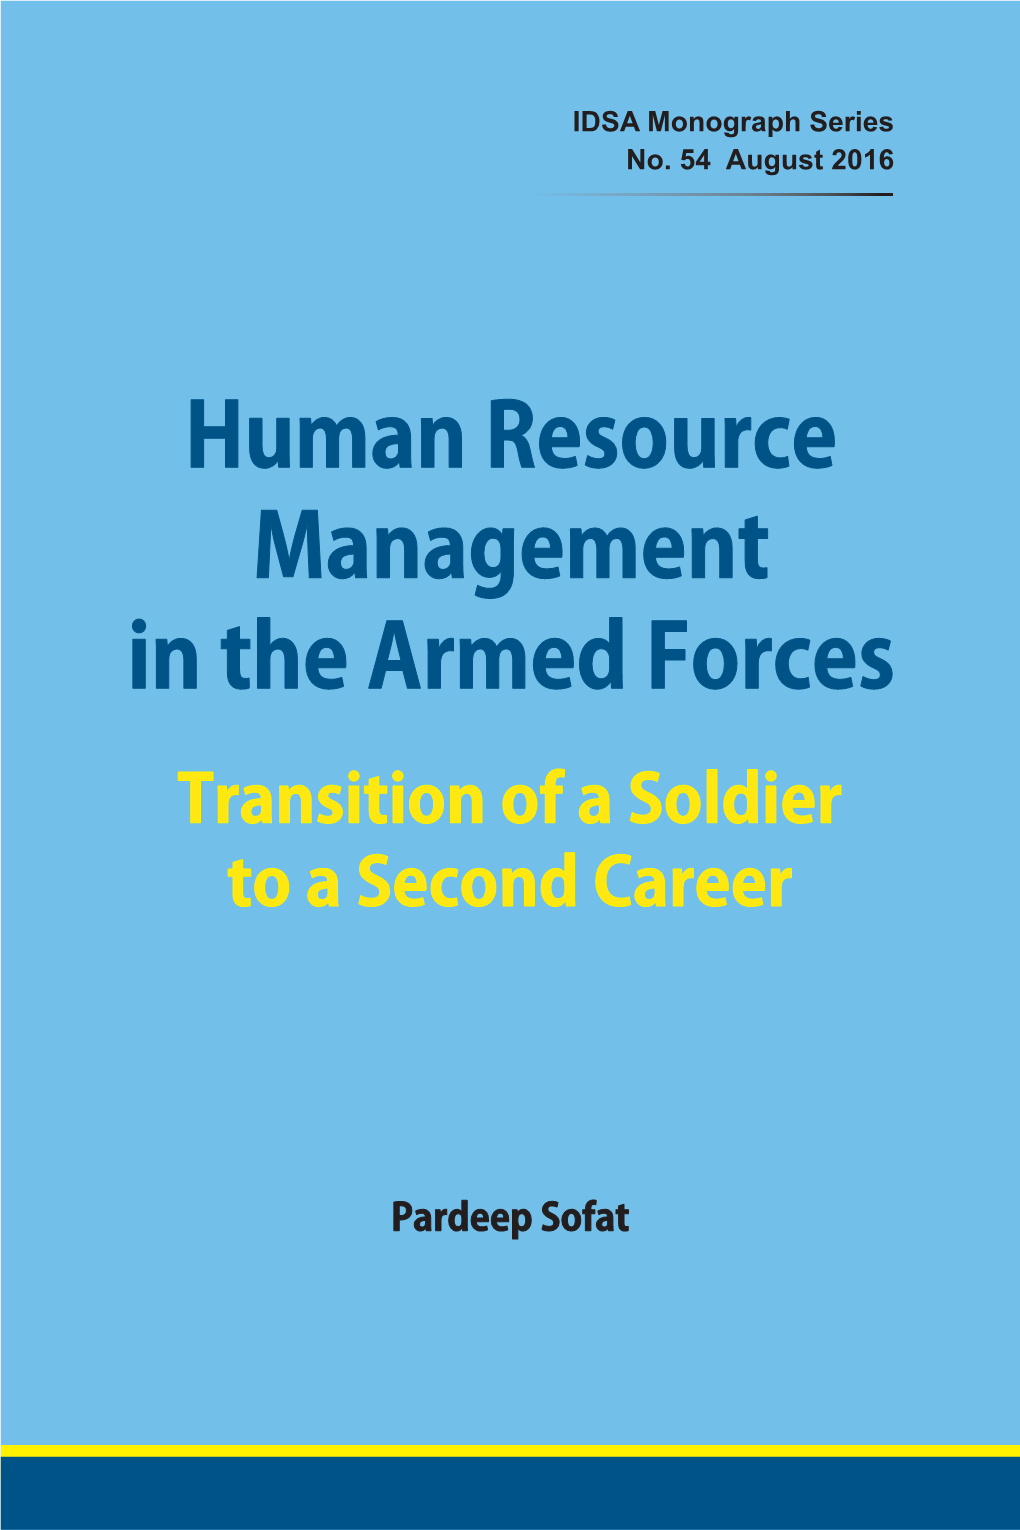 Human Resource Management in the Armed Forces| 1